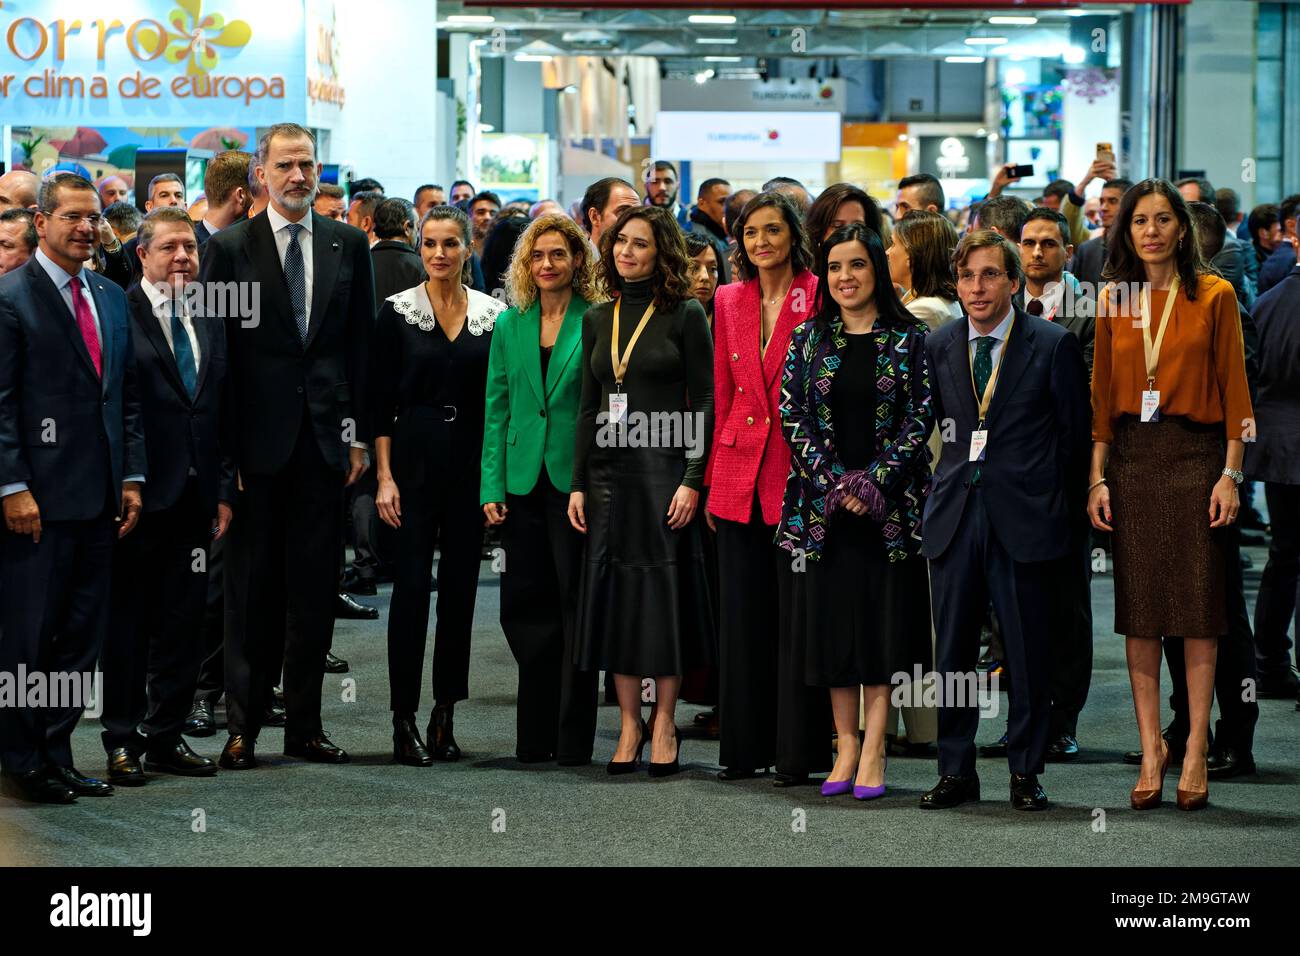 Madrid, Spain. 18th Jan, 2023.  FITUR the International Tourism Fair of Spain 2023. SS.MM. the King and Queen of Spain and different authorities officially inaugurate FITUR 2023, the International Tourism Fair. L to R, The president of Castilla-La Mancha, Emiliano Garcia-Page, King Felipe VI, Queen Letizia, the president of the Congress of Deputies, Meritxell Batet, the president of the Community of Madrid, Isabel Diaz Ayuso, the minister of Industry, Trade and Tourism, Reyes Maroto and Jose Luis Martinez-Almeida, Mayor of Madrid. IFEMA, Madrid, Spain. Credit: EnriquePSans/Alamy Live News Stock Photo